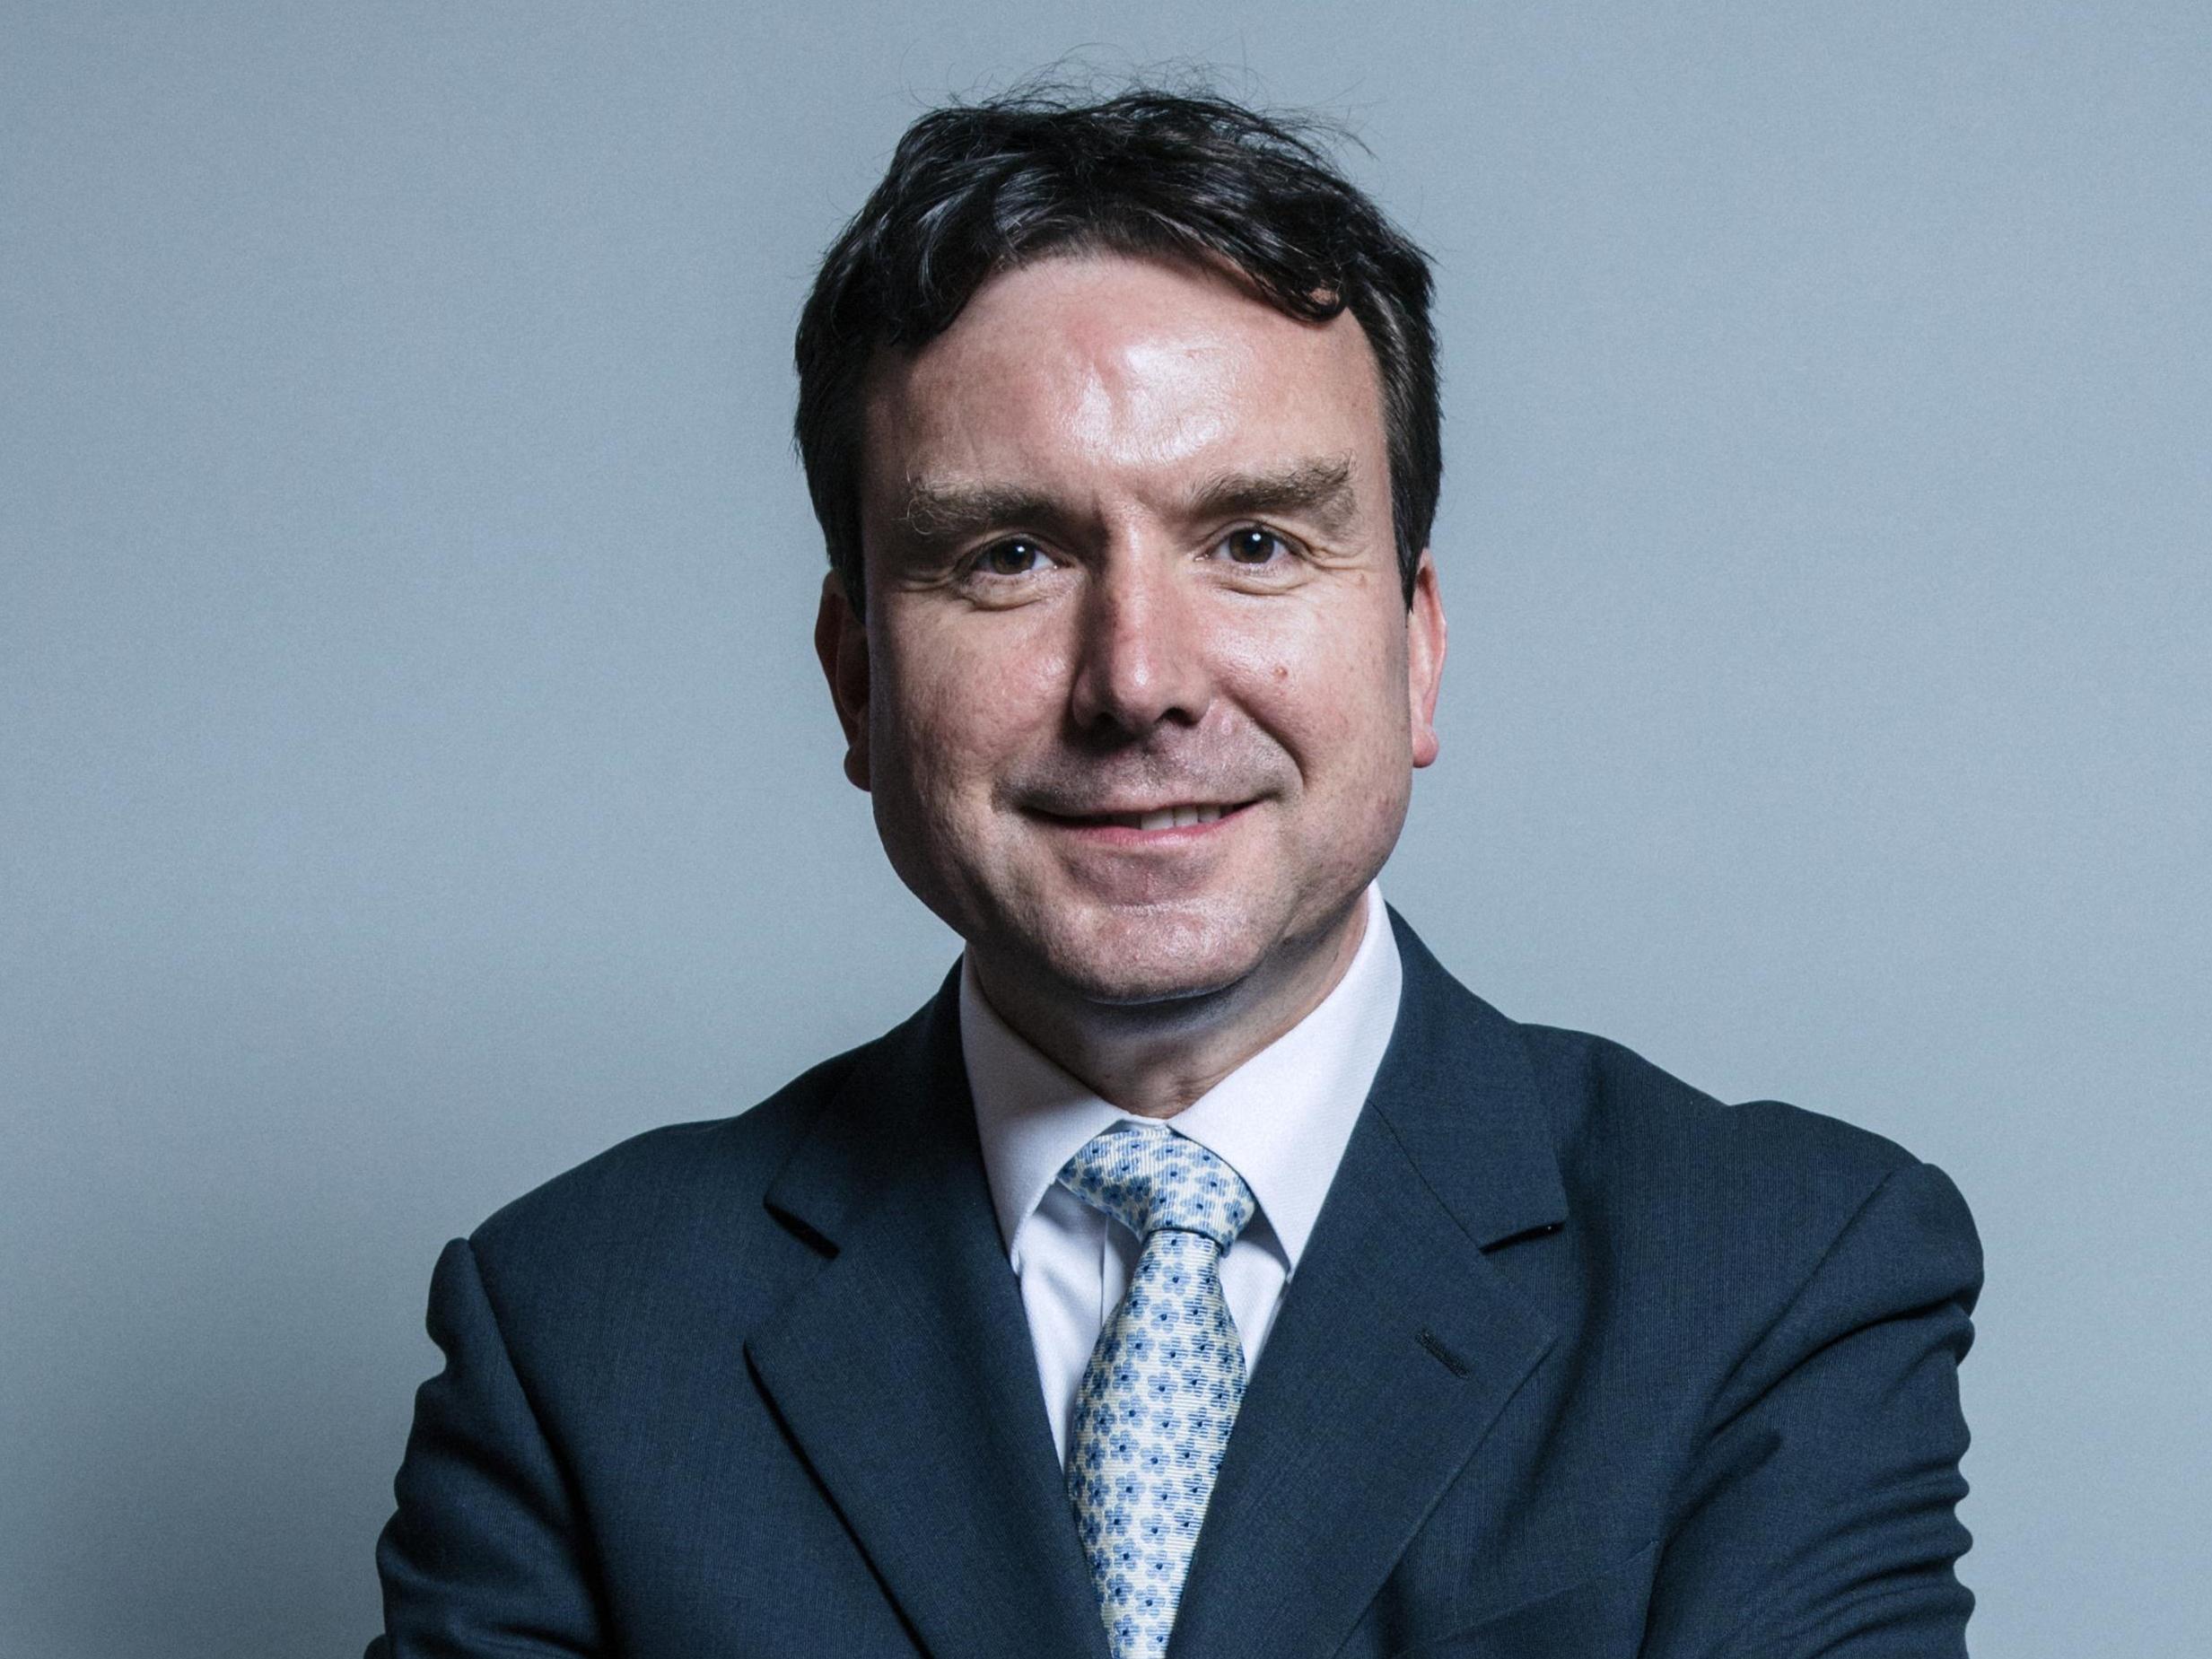 Andrew Griffiths resigned last year after the scandal emerged